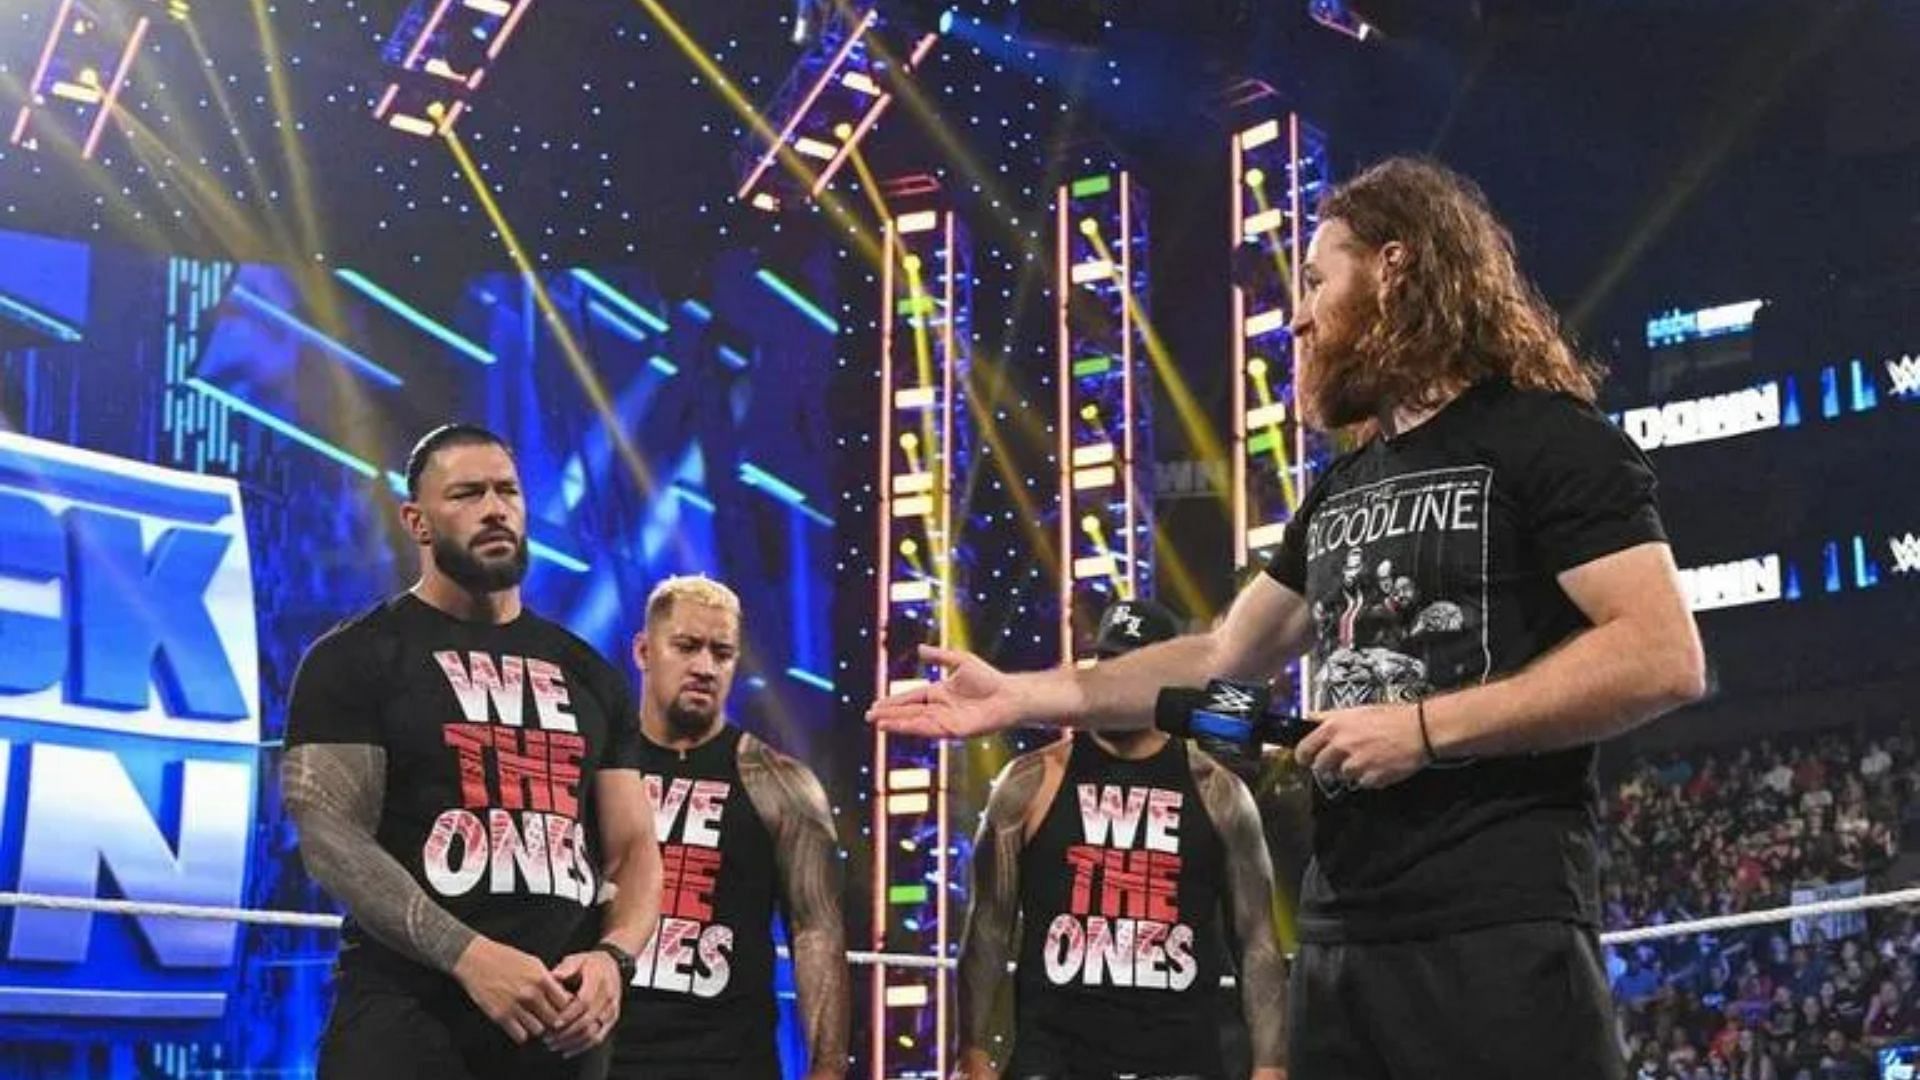 The Honorary Uce storyline is unlikely to make it to WrestleMania